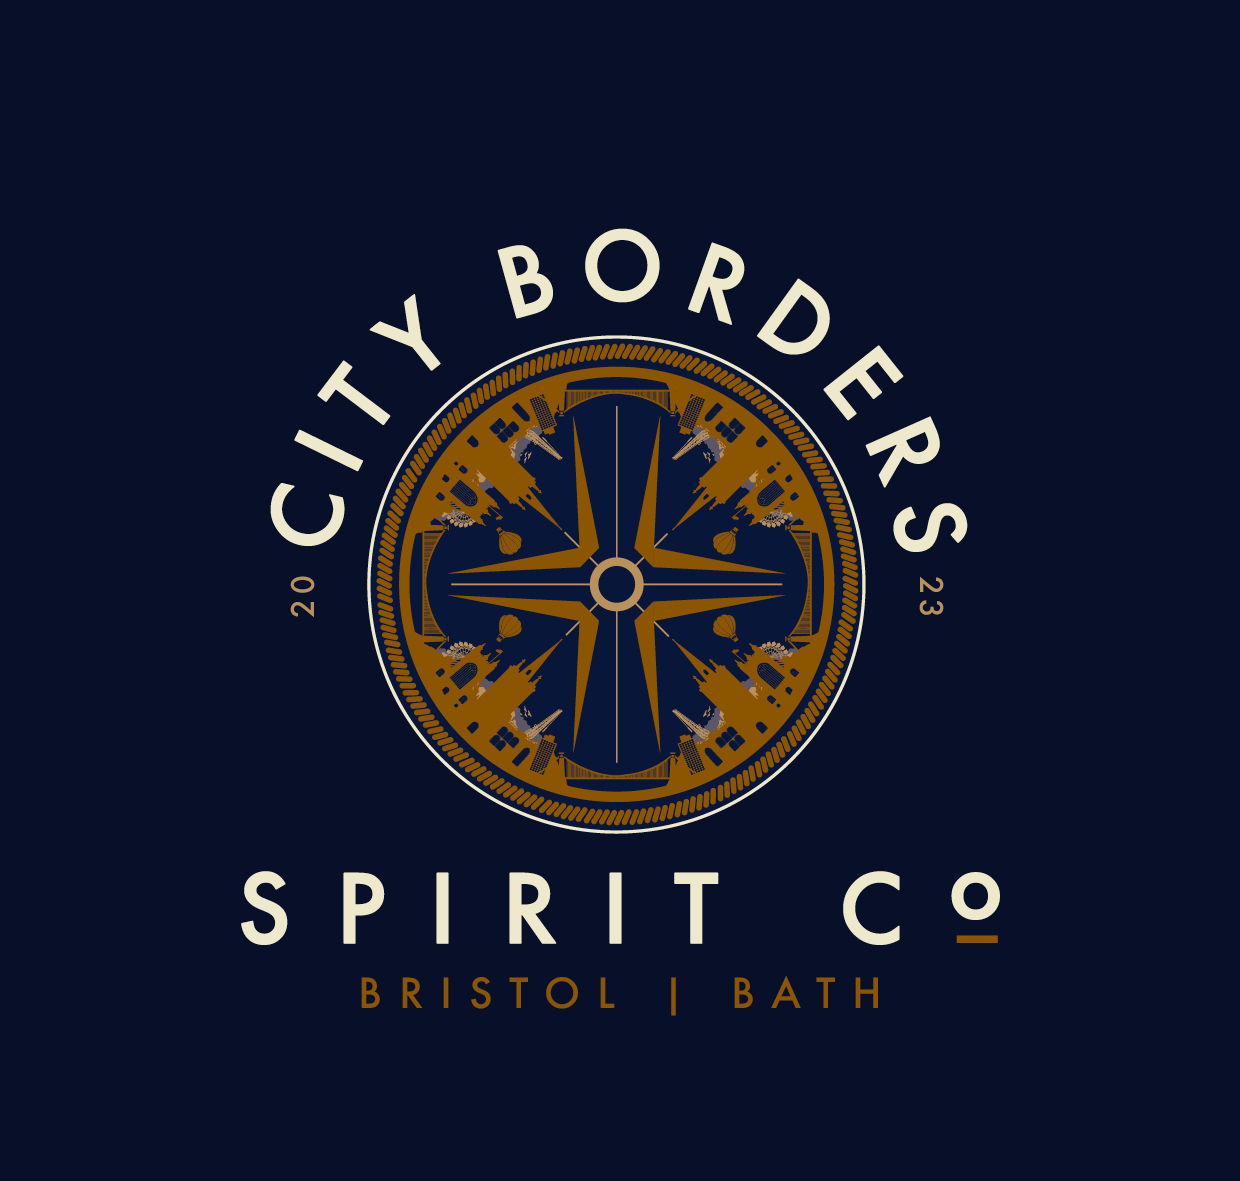 City Borders Spirit Co logo design by logo designer James Daniel Design for your inspiration and for the worlds largest logo competition